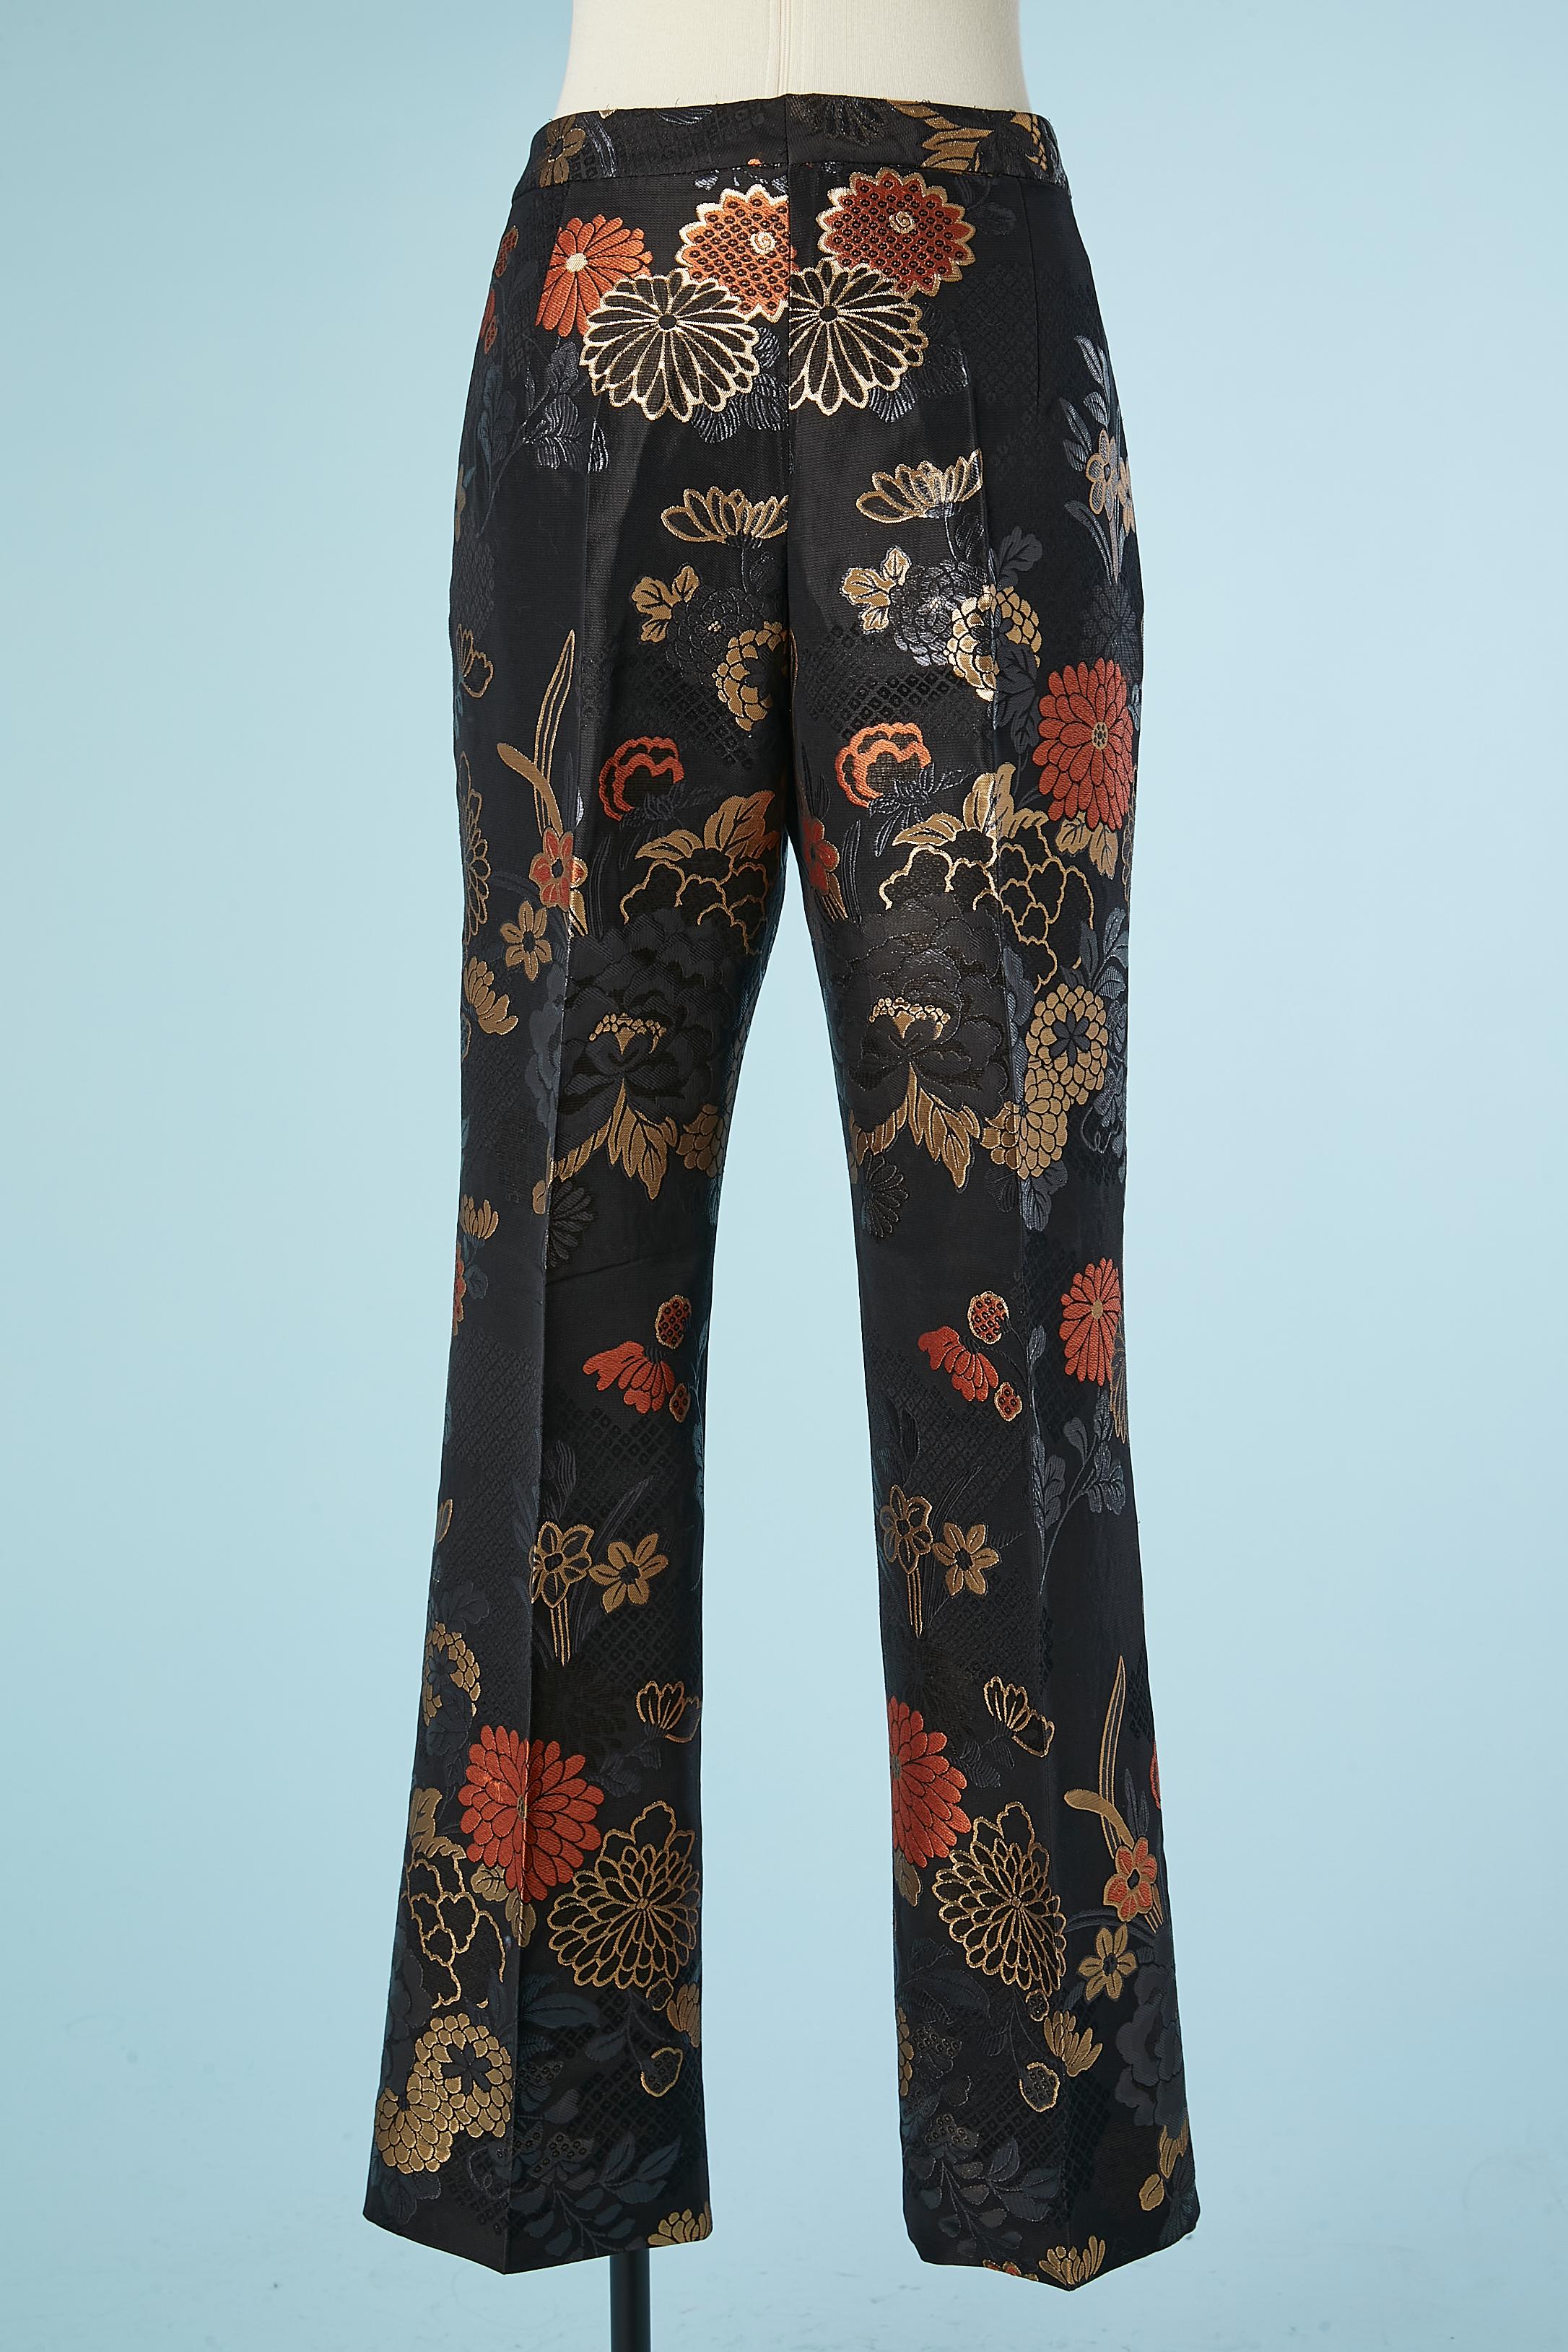 Damask evening trousers with flowers pattern Emanuel Ungaro  For Sale 1